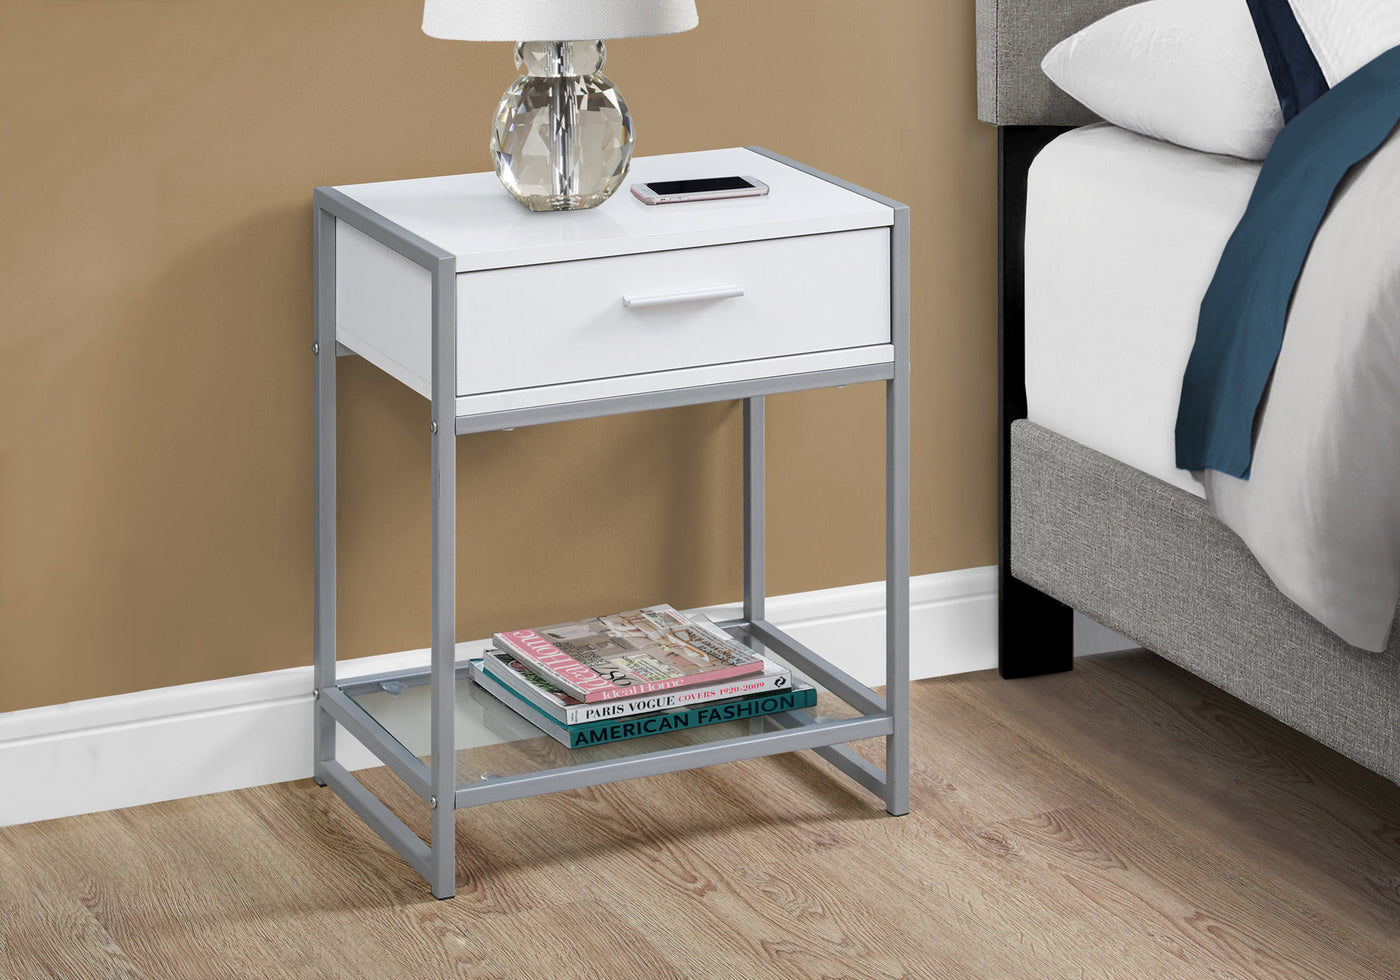 22" Black End Table With Drawer And Shelf